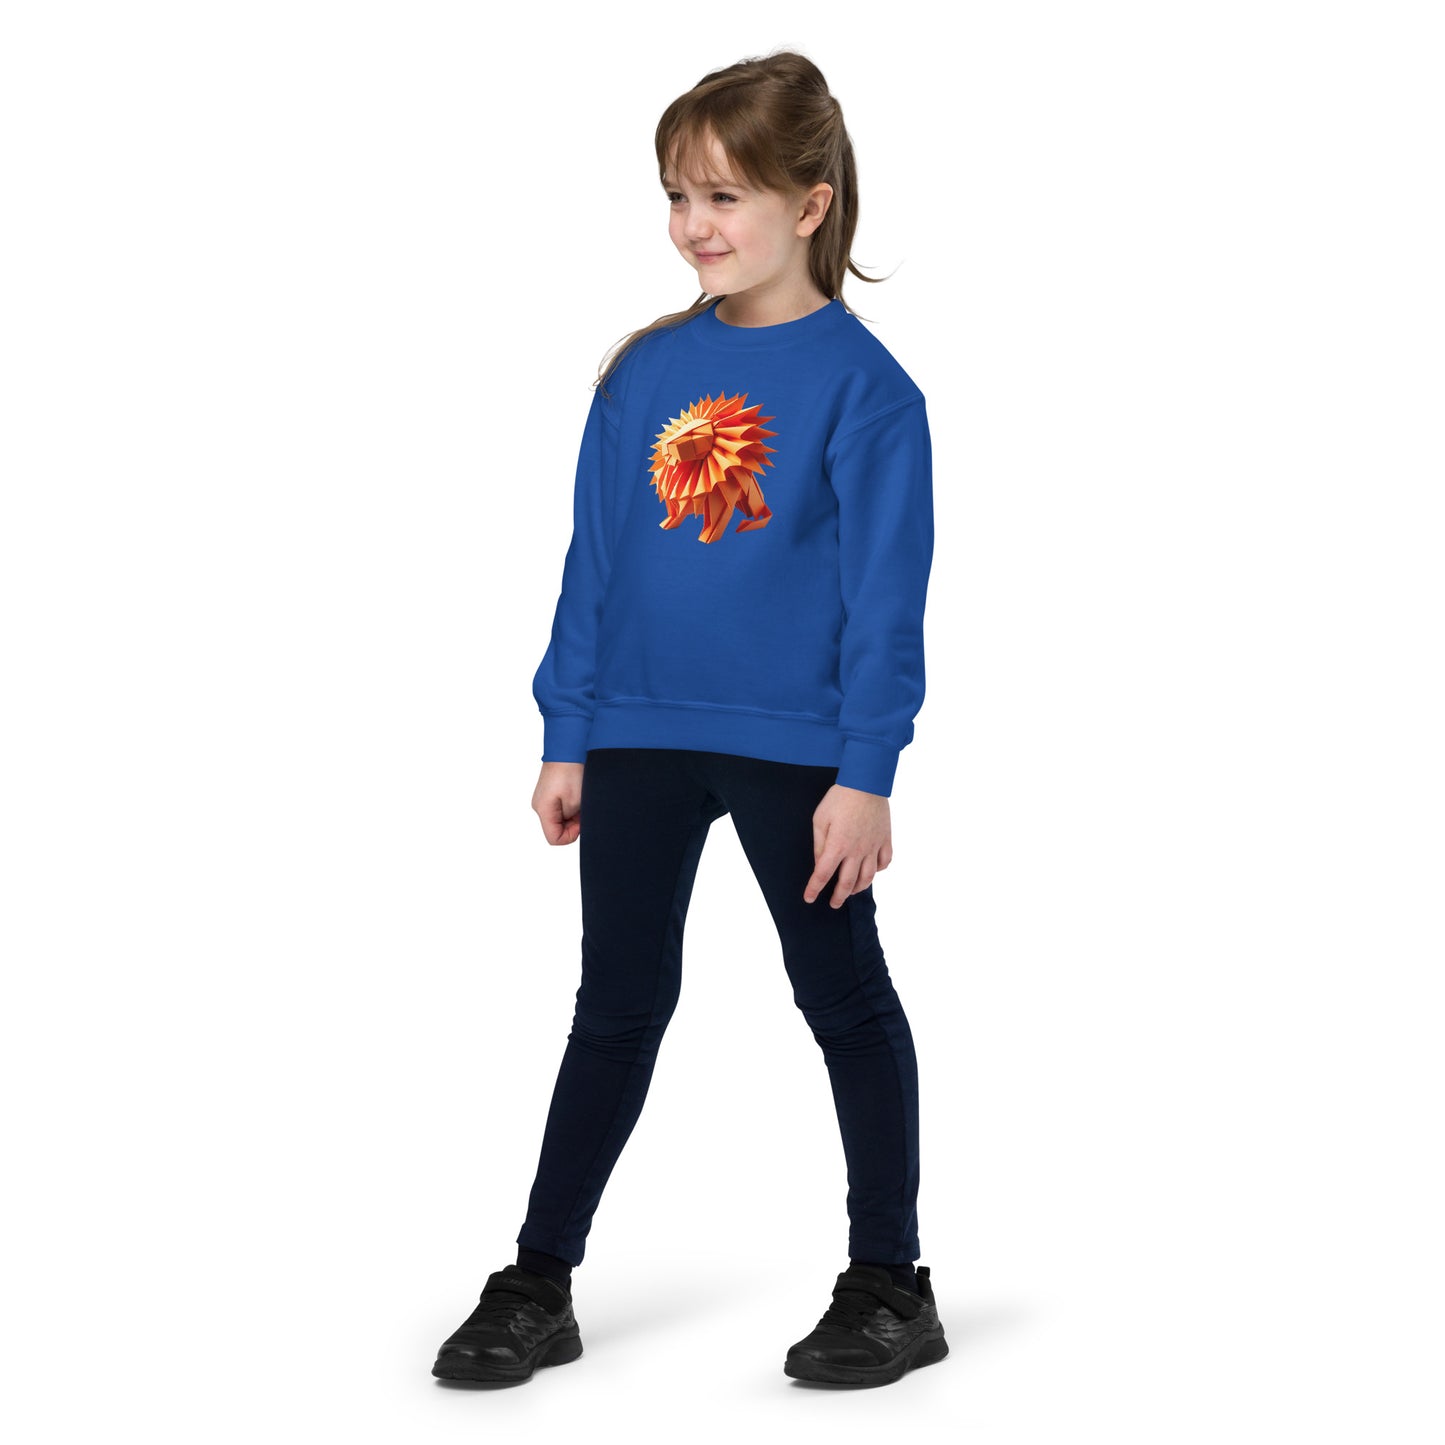 Youth with royal bue sweater with print of a lion